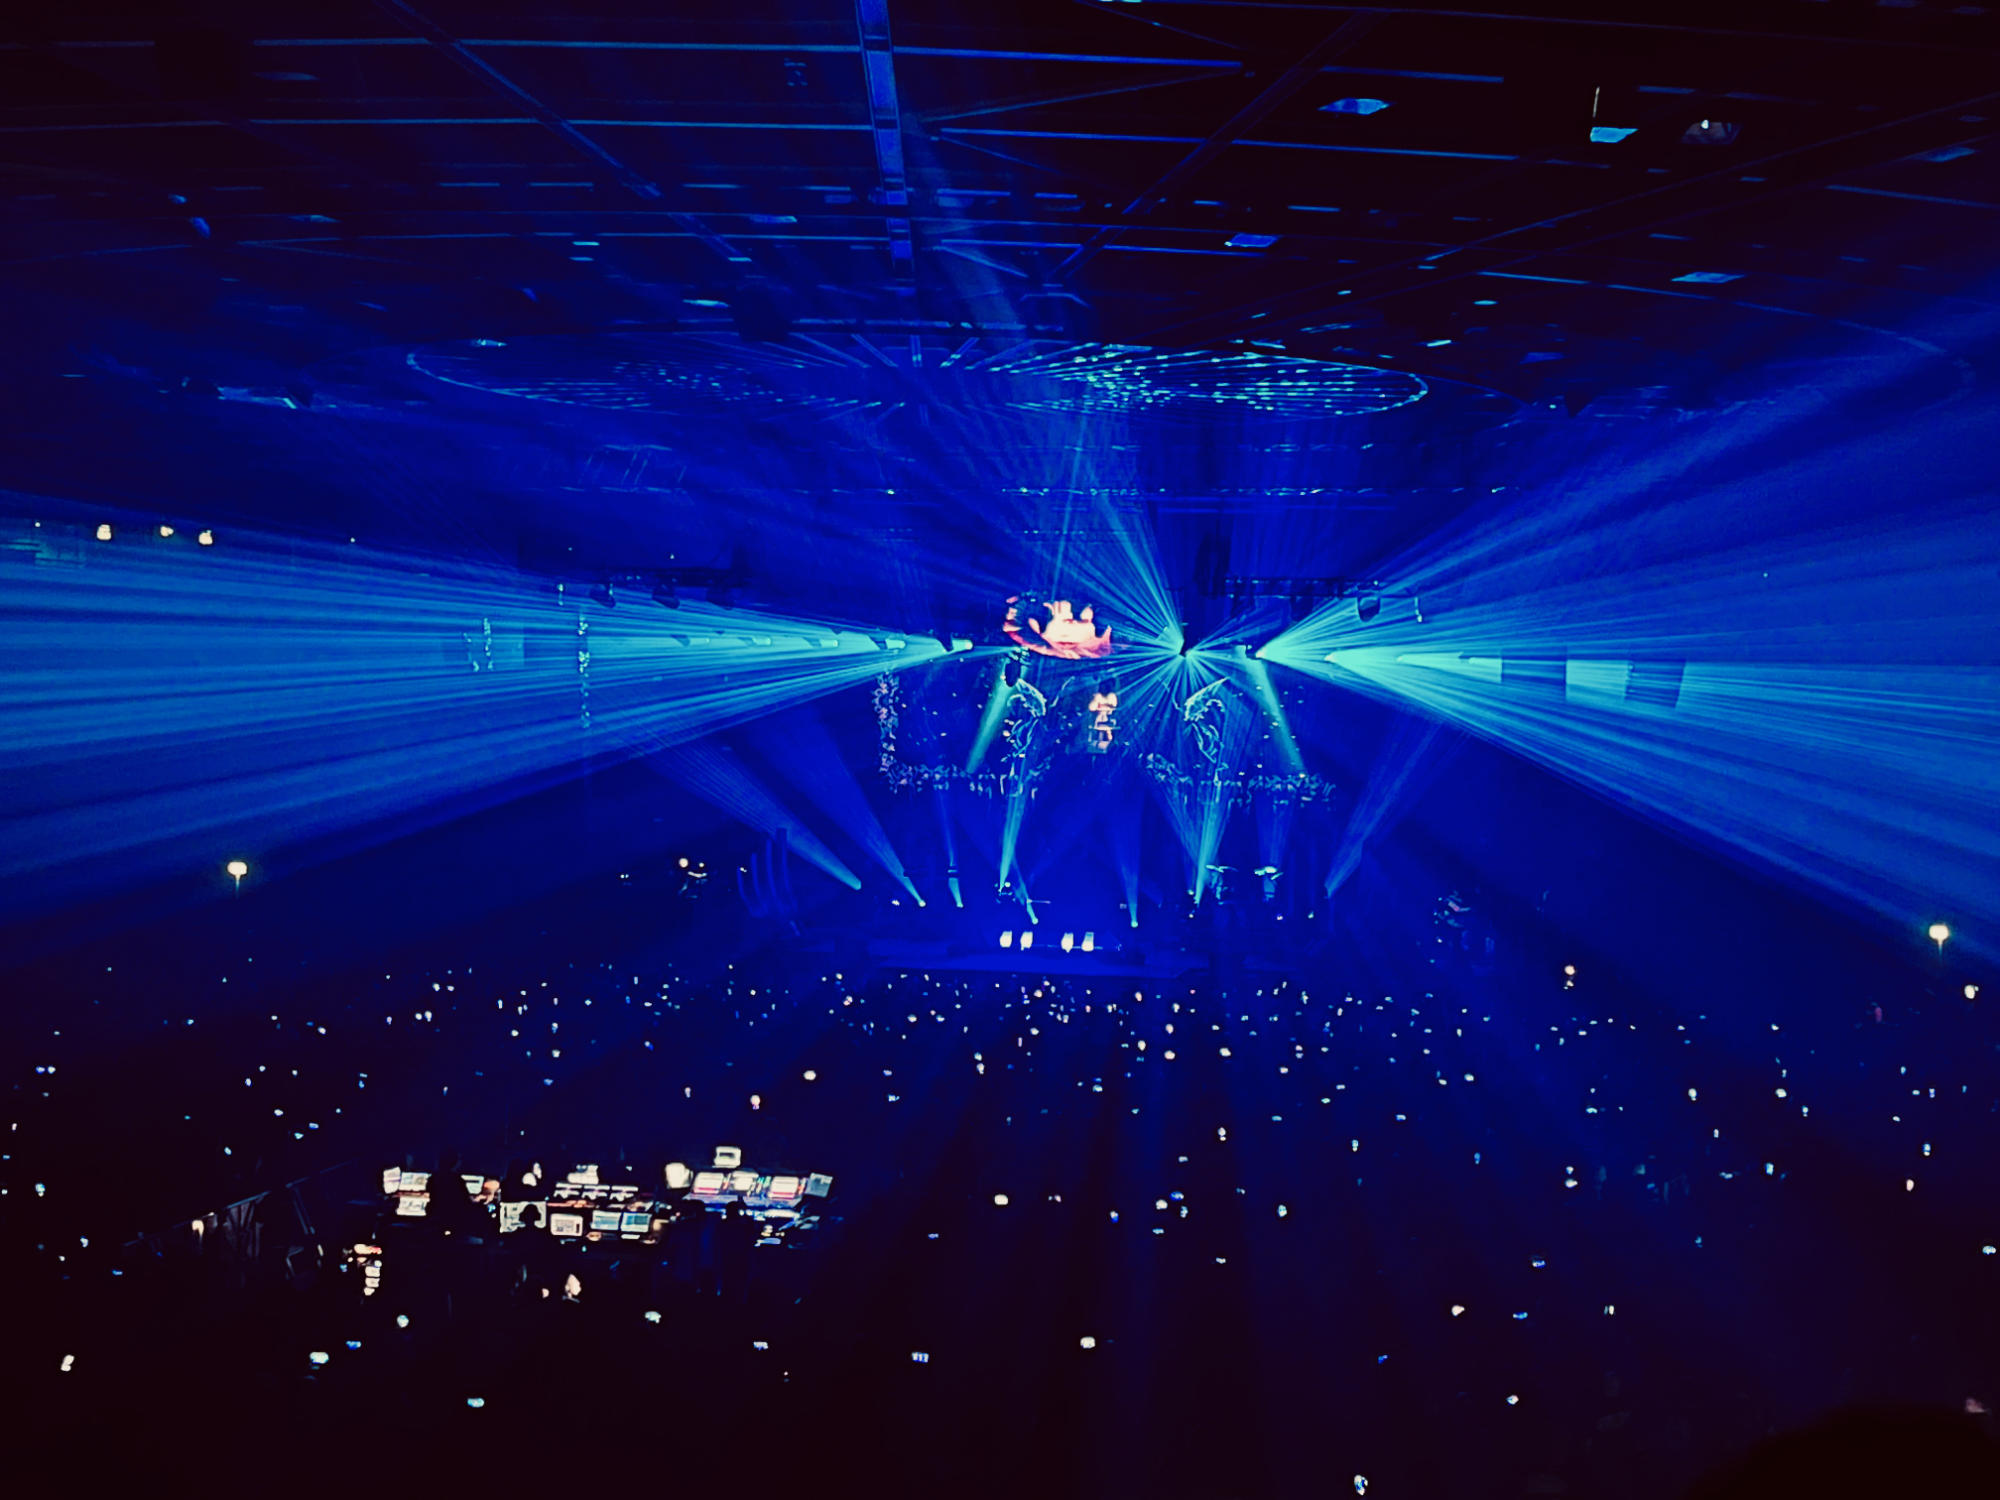 Concert stage with blue light spots shining into the audience